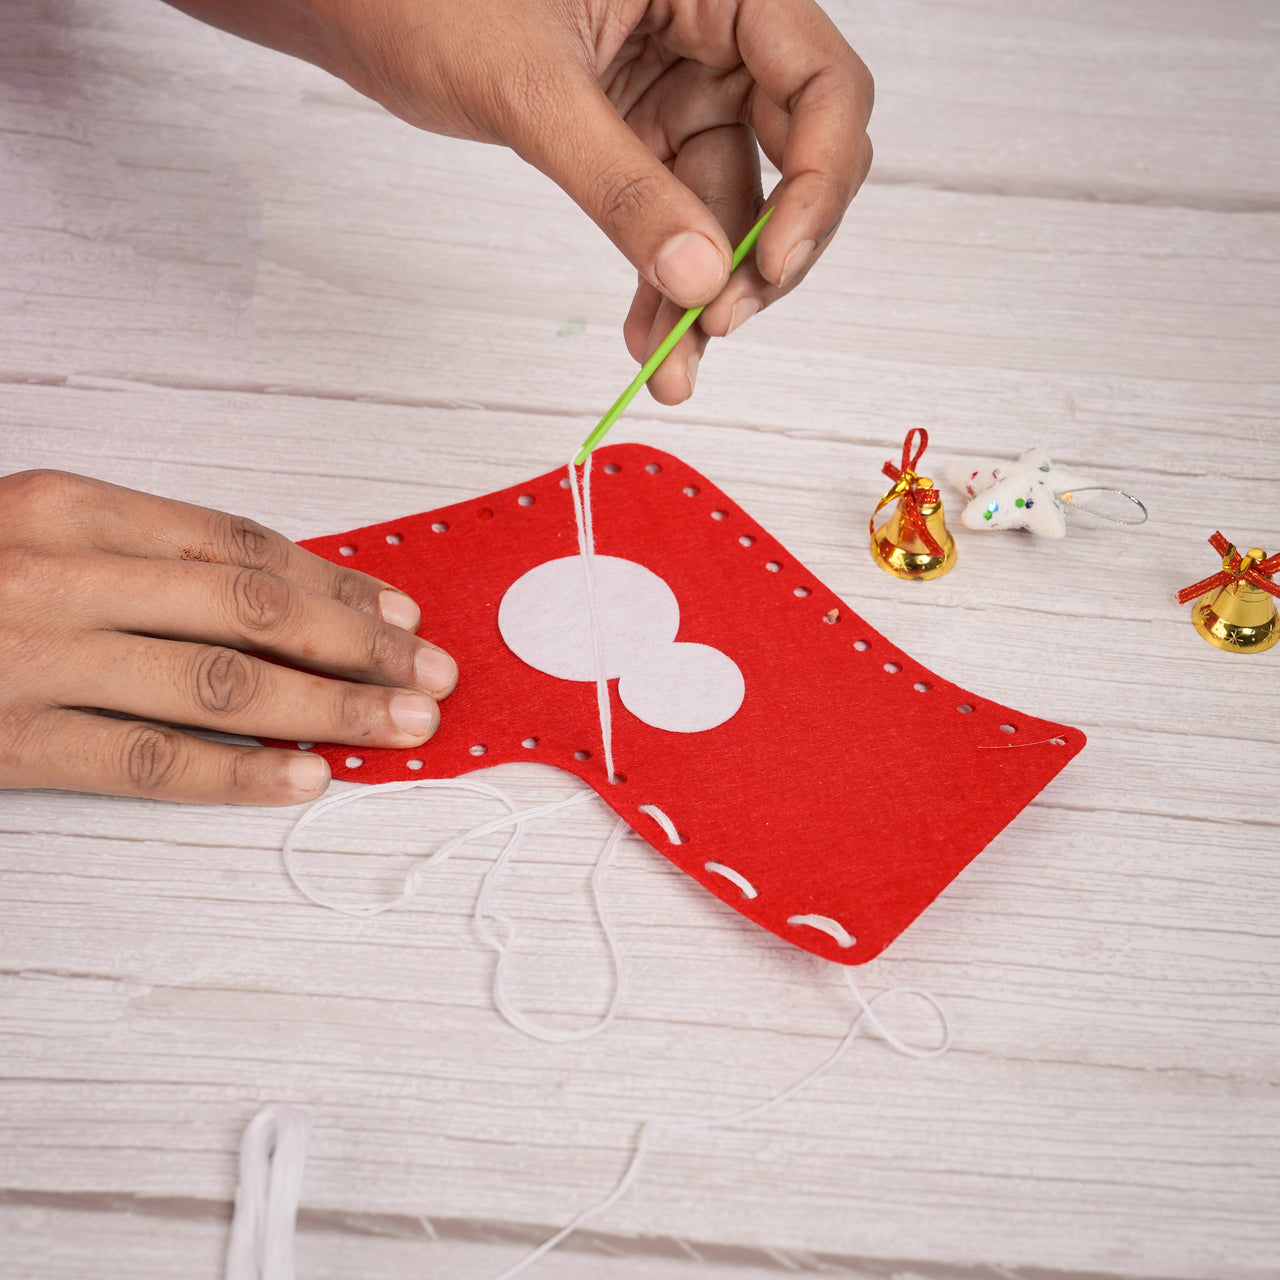 DIY - Sew Your Own Christmas Stocking